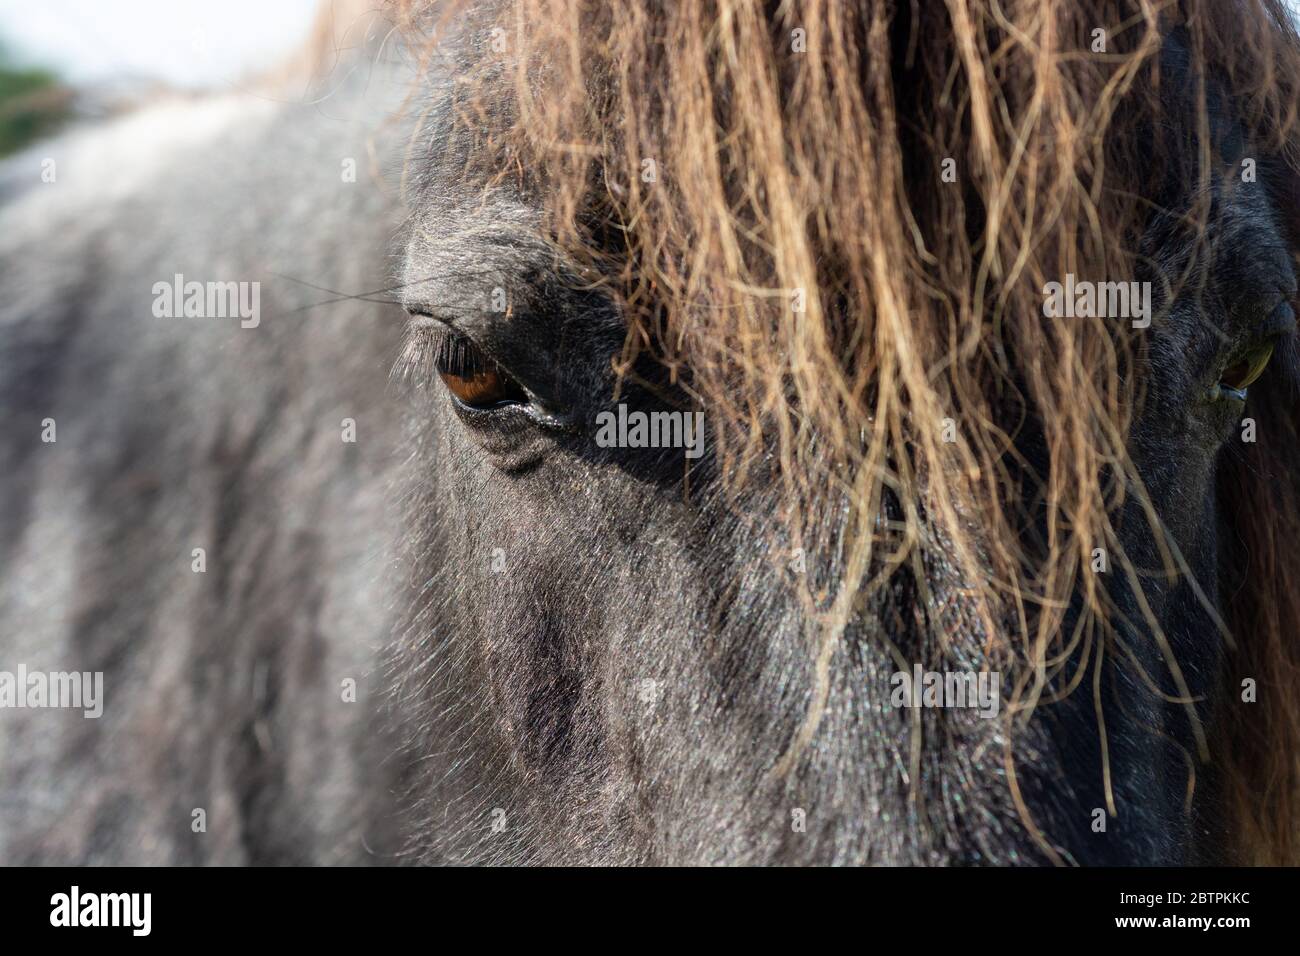 Horse eye and face close up Stock Photo